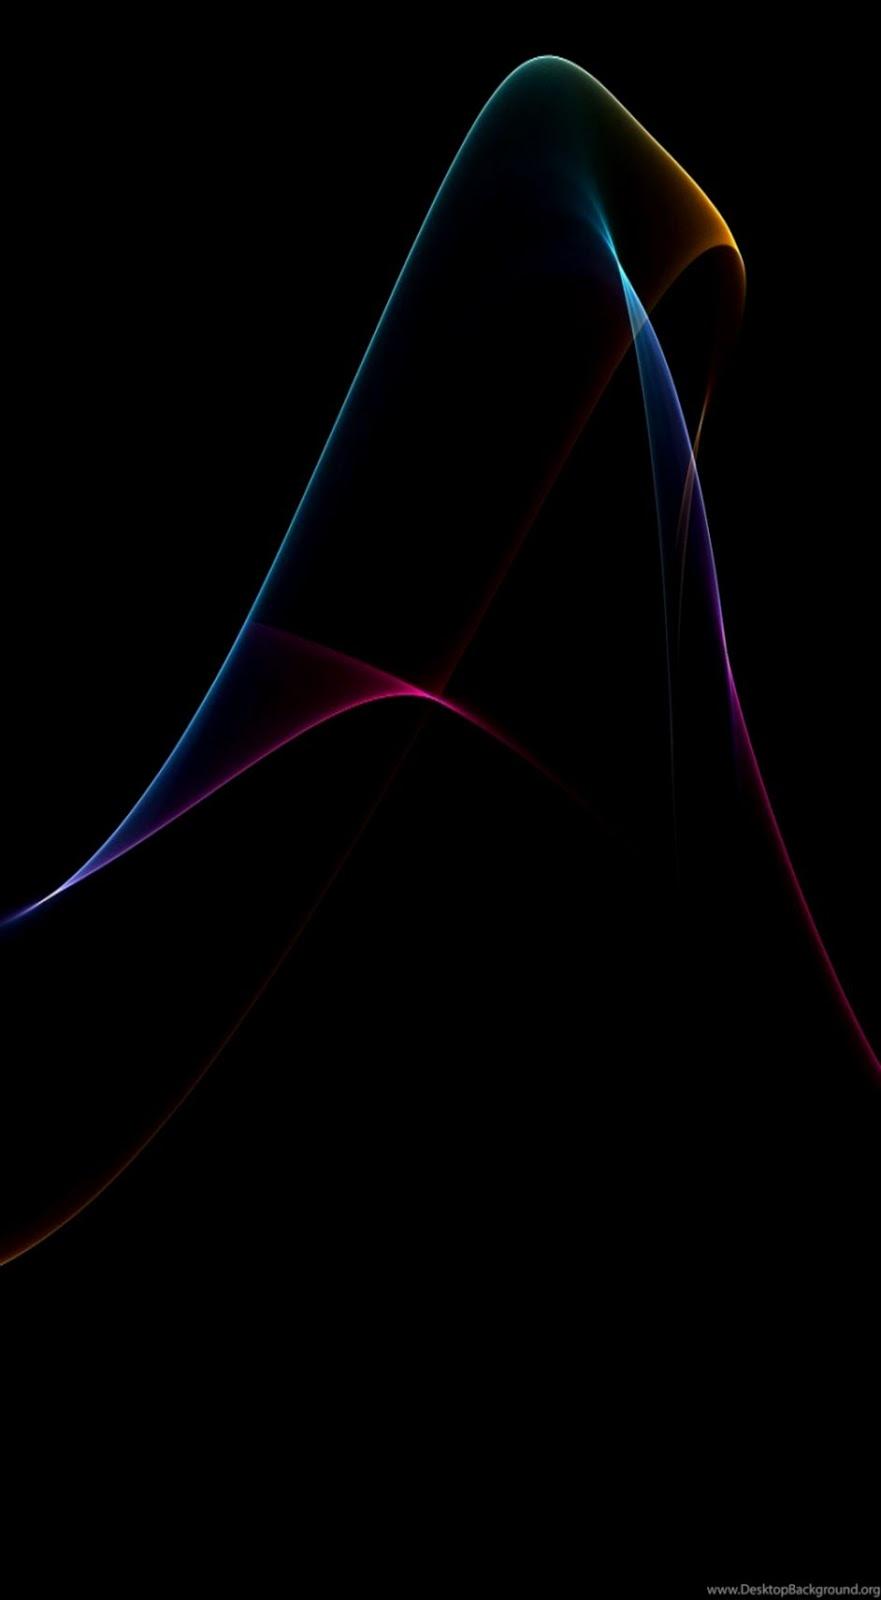 iPhone S5 Full HD Wallpapers - Wallpaper Cave